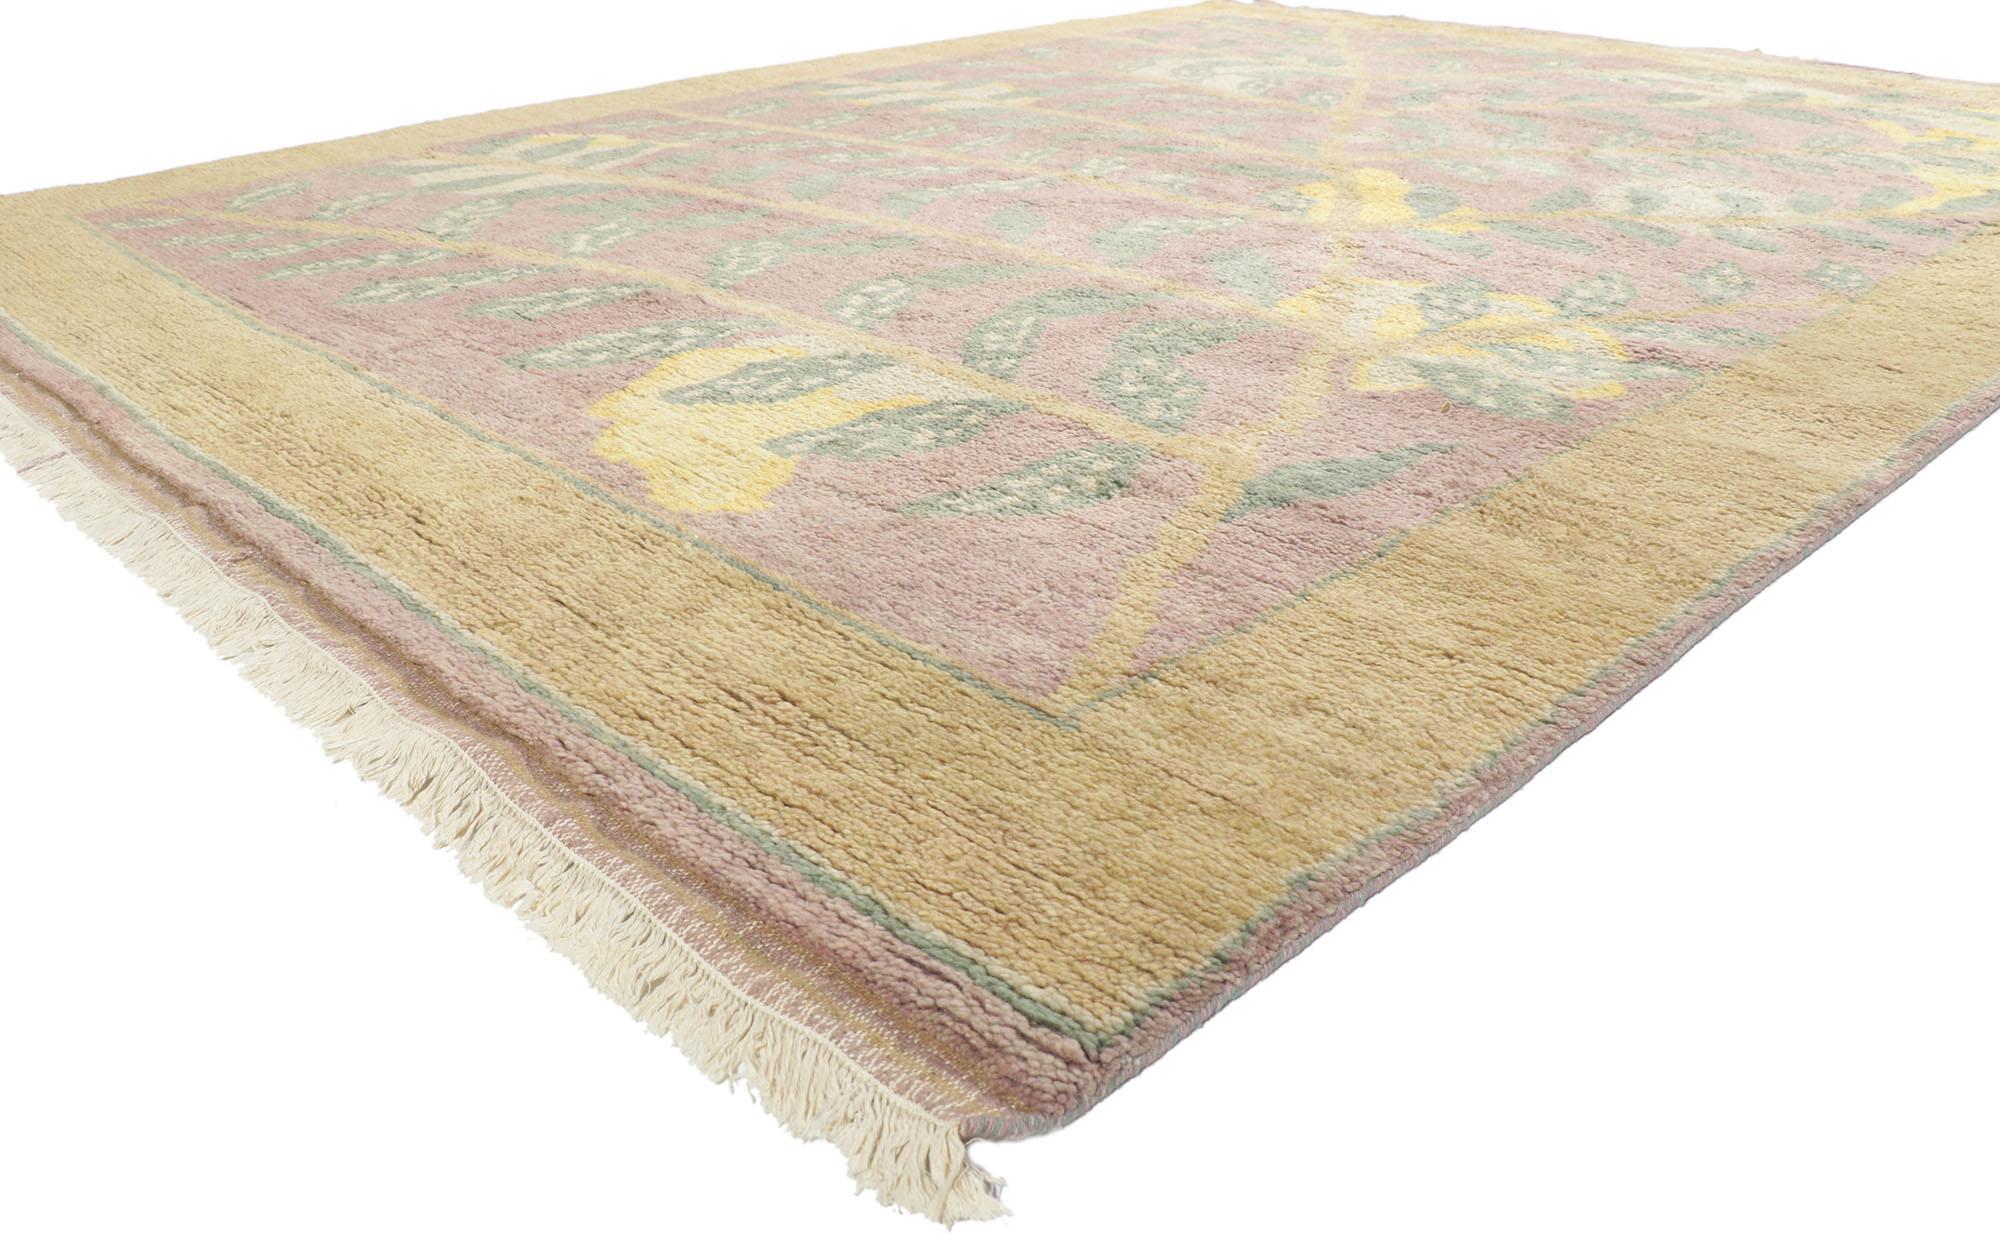 30768 Modern Moroccan Area Rug with Biophilic Design, 09'01 x 11'09.
Inspired by the principles of biophilic design and modern style, this hand-knotted wool Moroccan style rug becomes a embodiment of nature-infused aesthetics. The carefully woven